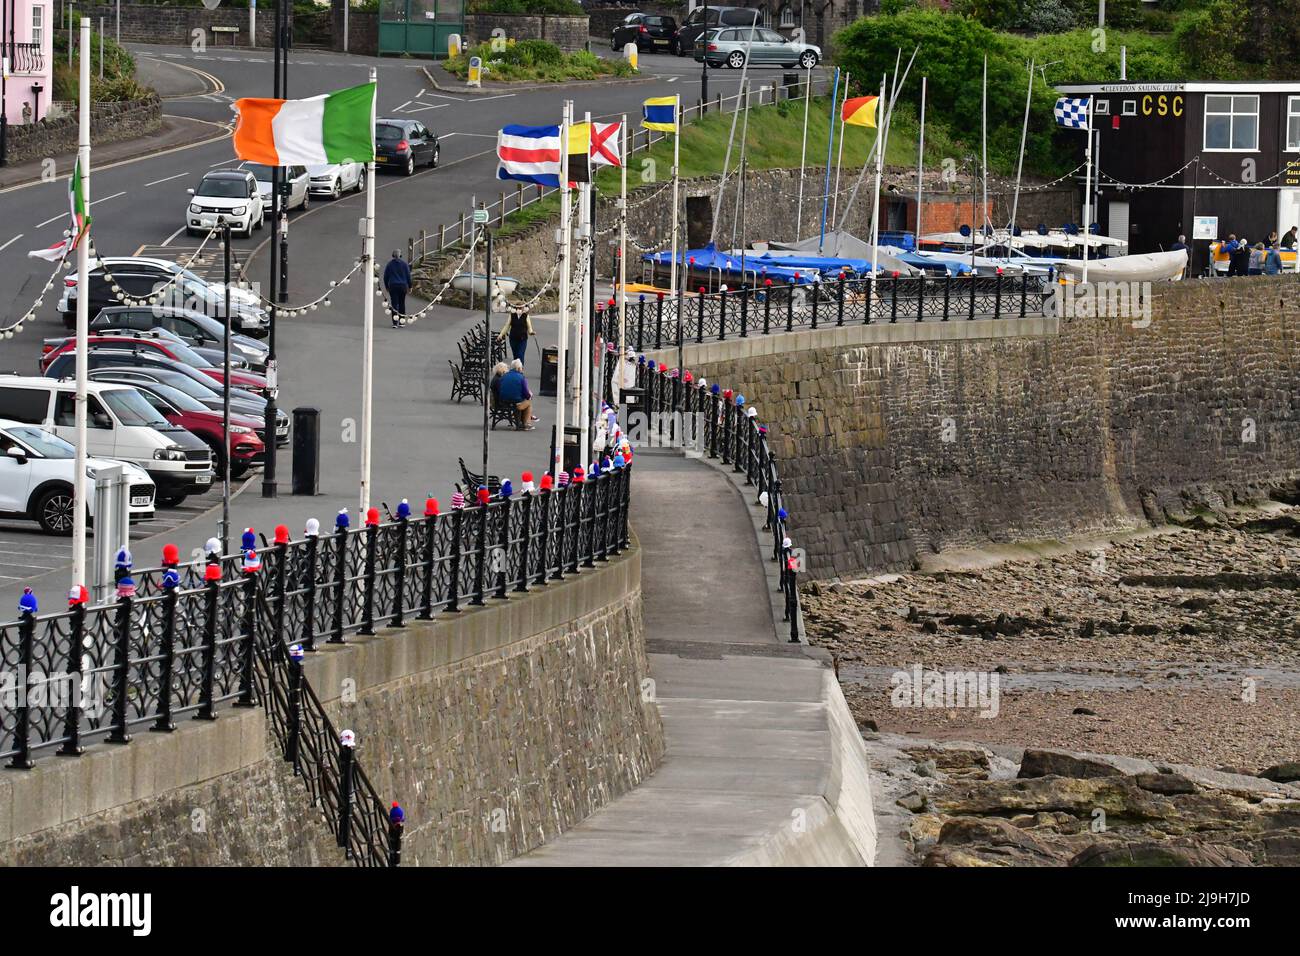 Clevedon, UK. 23rd May, 2022. On a mild Monday evening at Clevedon Seafront, knitted hats of all colors are seen sitting on top of the safety railing which run the entire length of the promenade getting ready for the Queen's Platinum Jubilee. Picture Credit: Robert Timoney/Alamy Live News Stock Photo